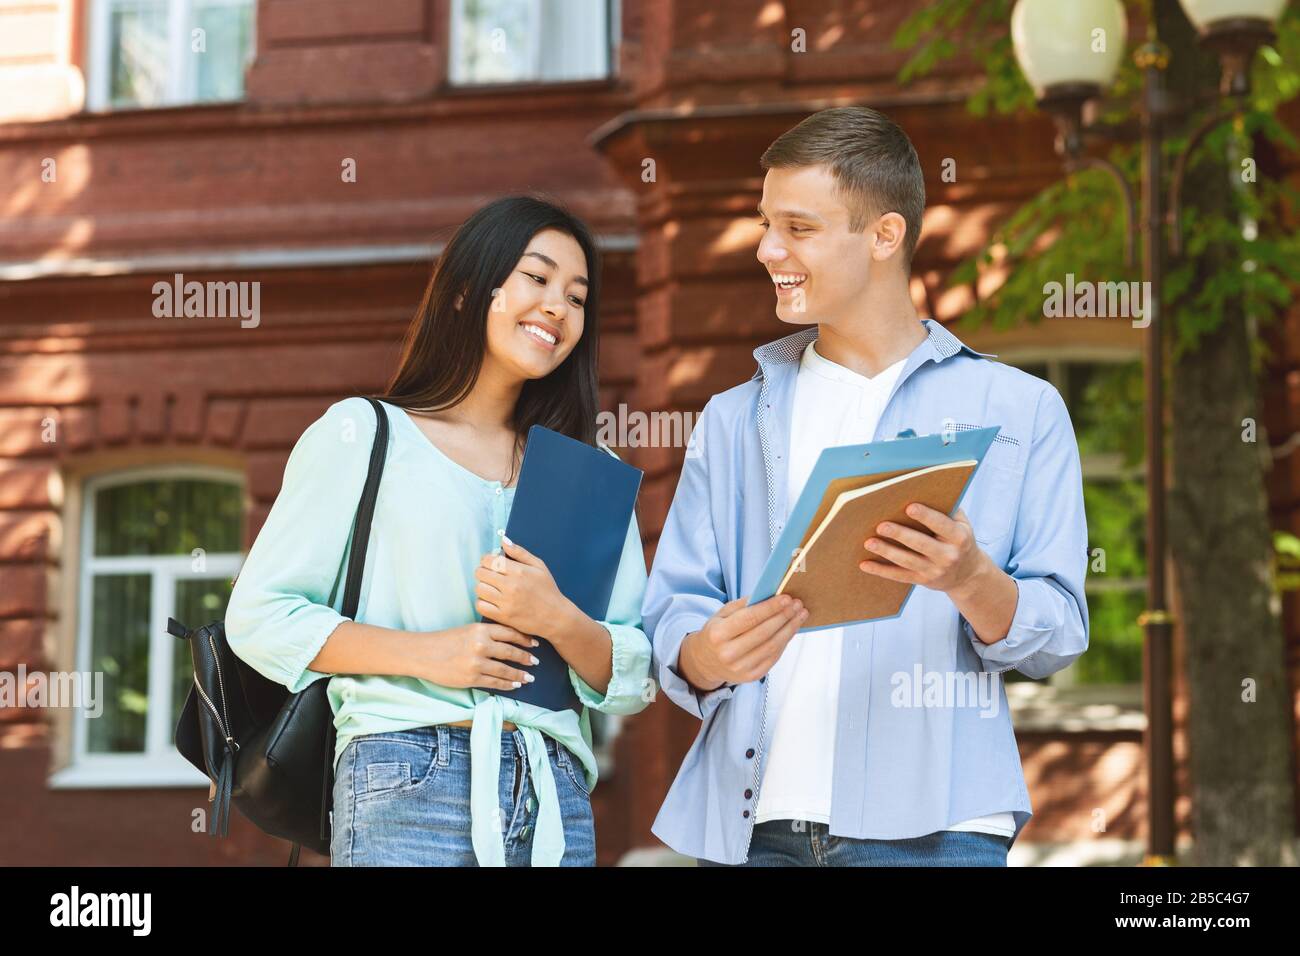 Cheerful university friends resting between classes outdoors, chatting and smiling Stock Photo